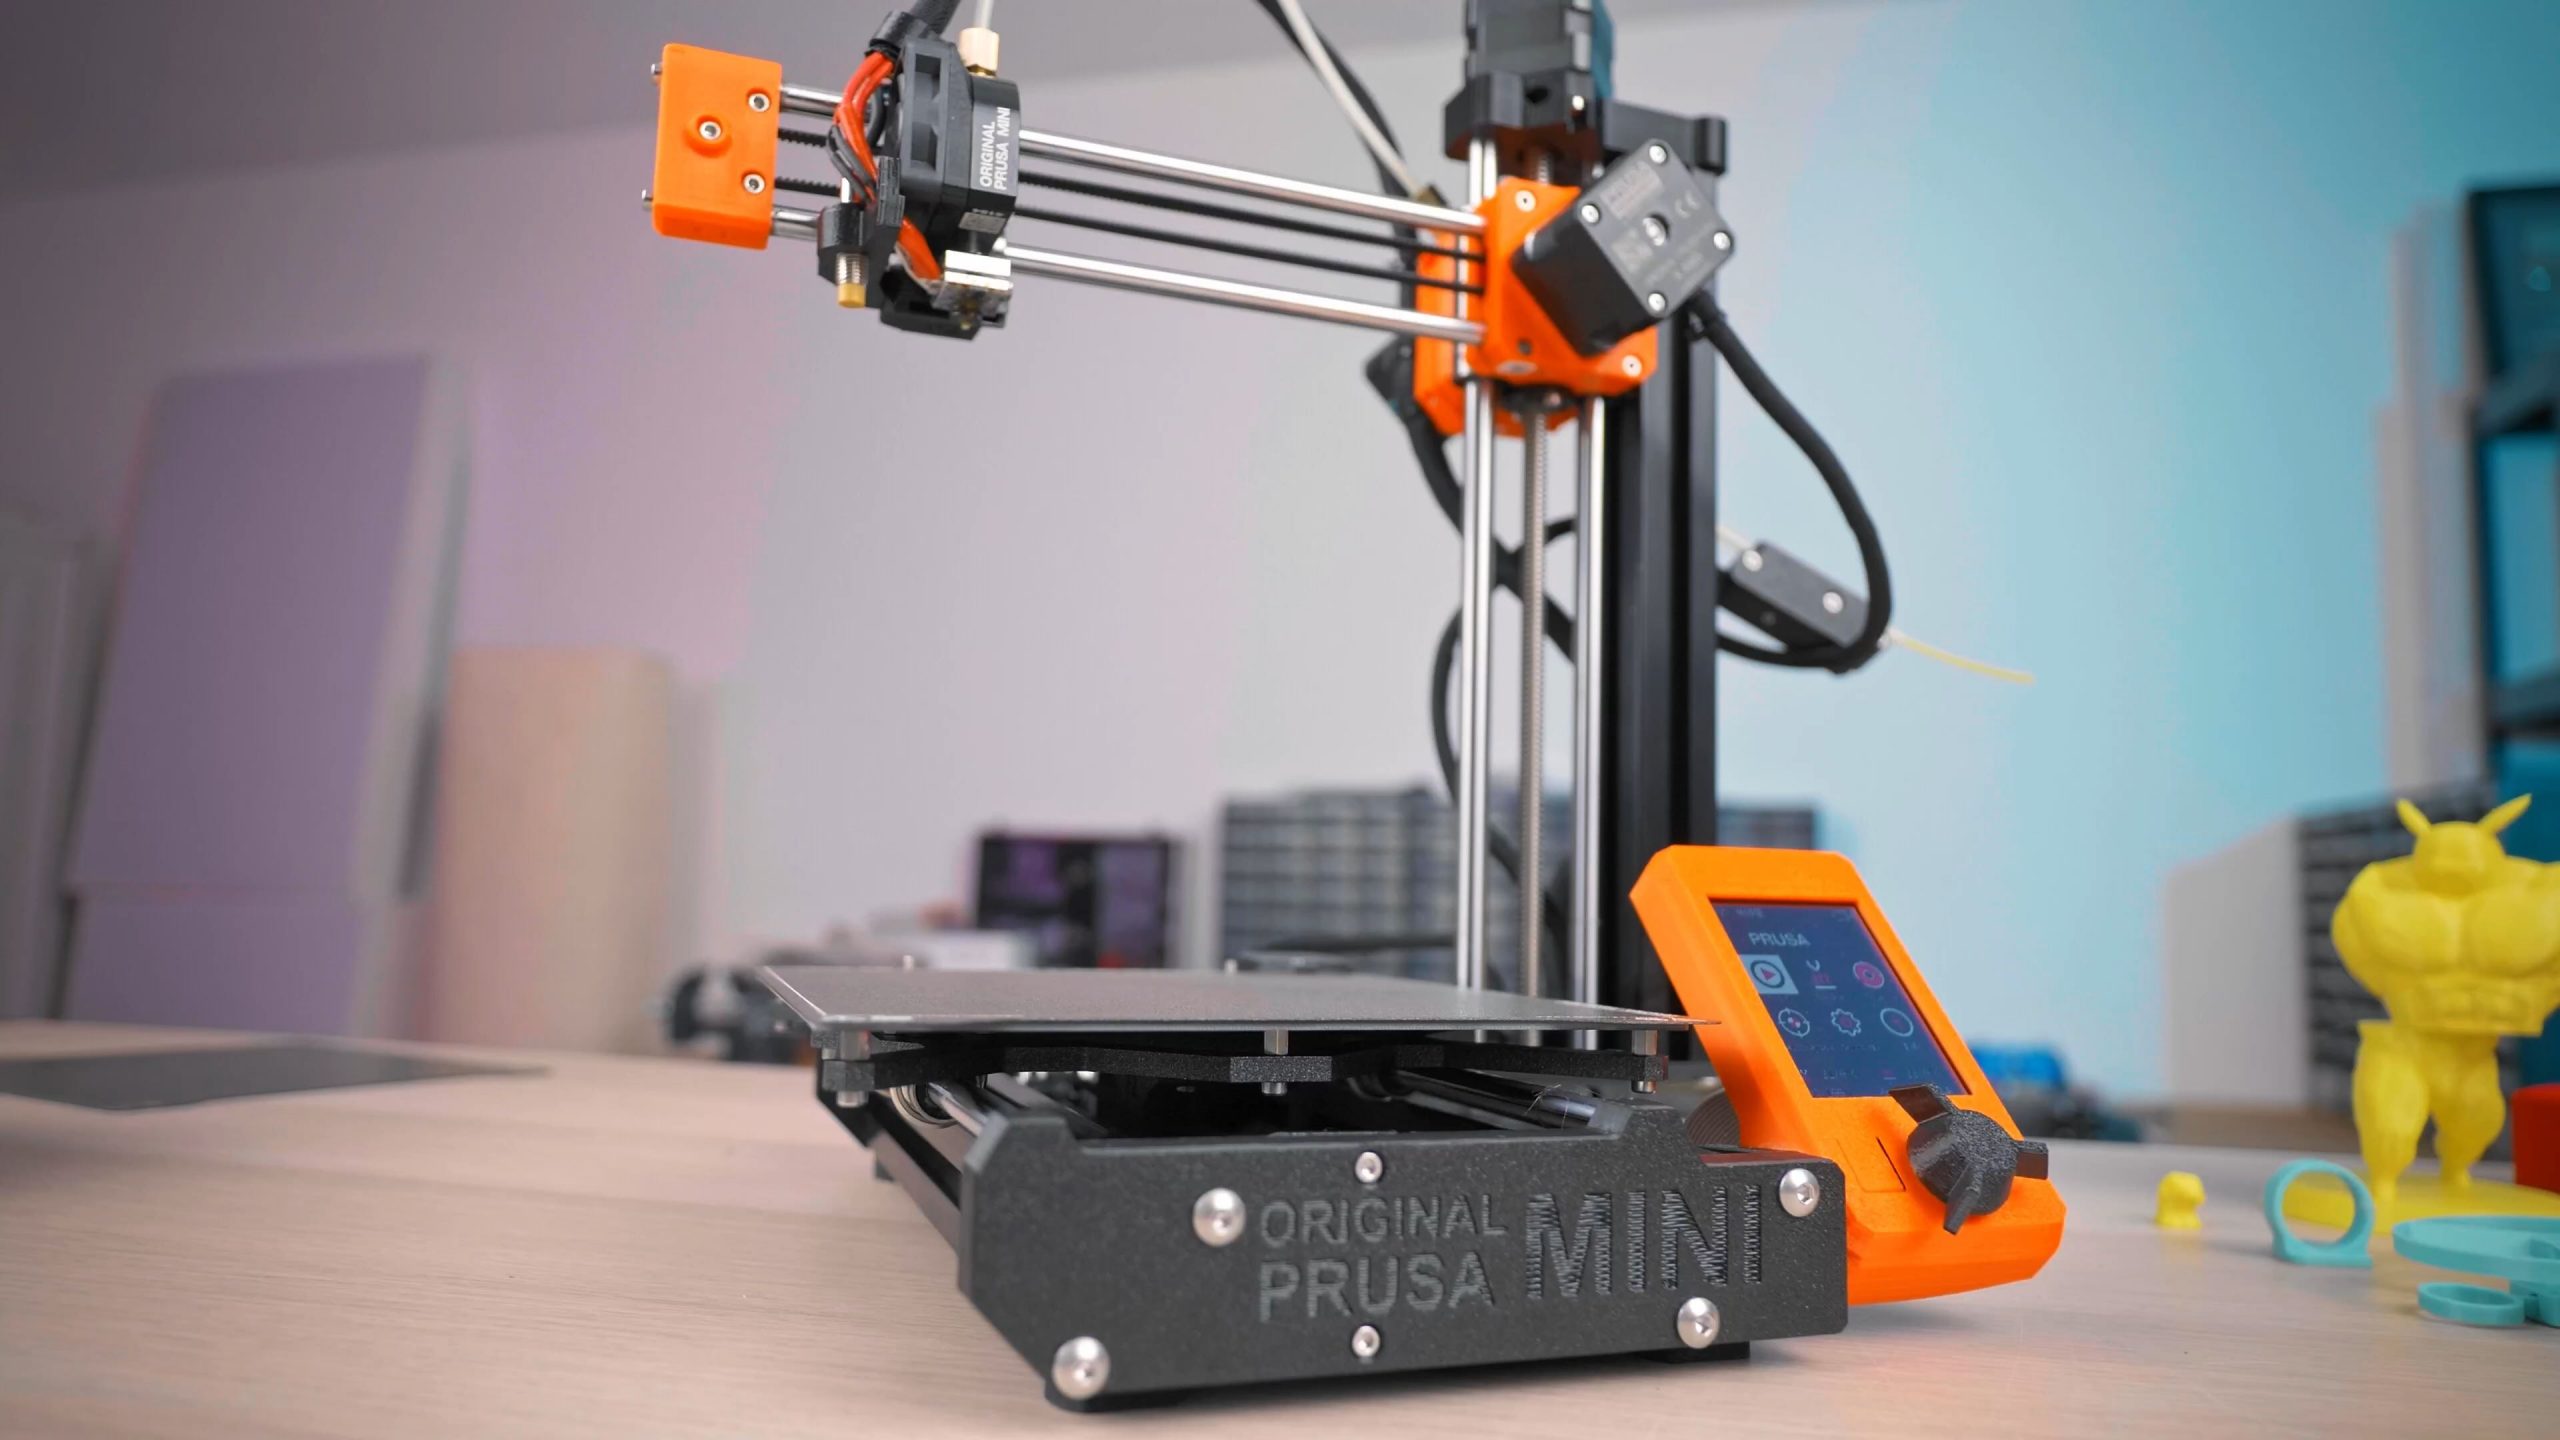 next thing: Prusa Review – Tom's 3D printing and reviews